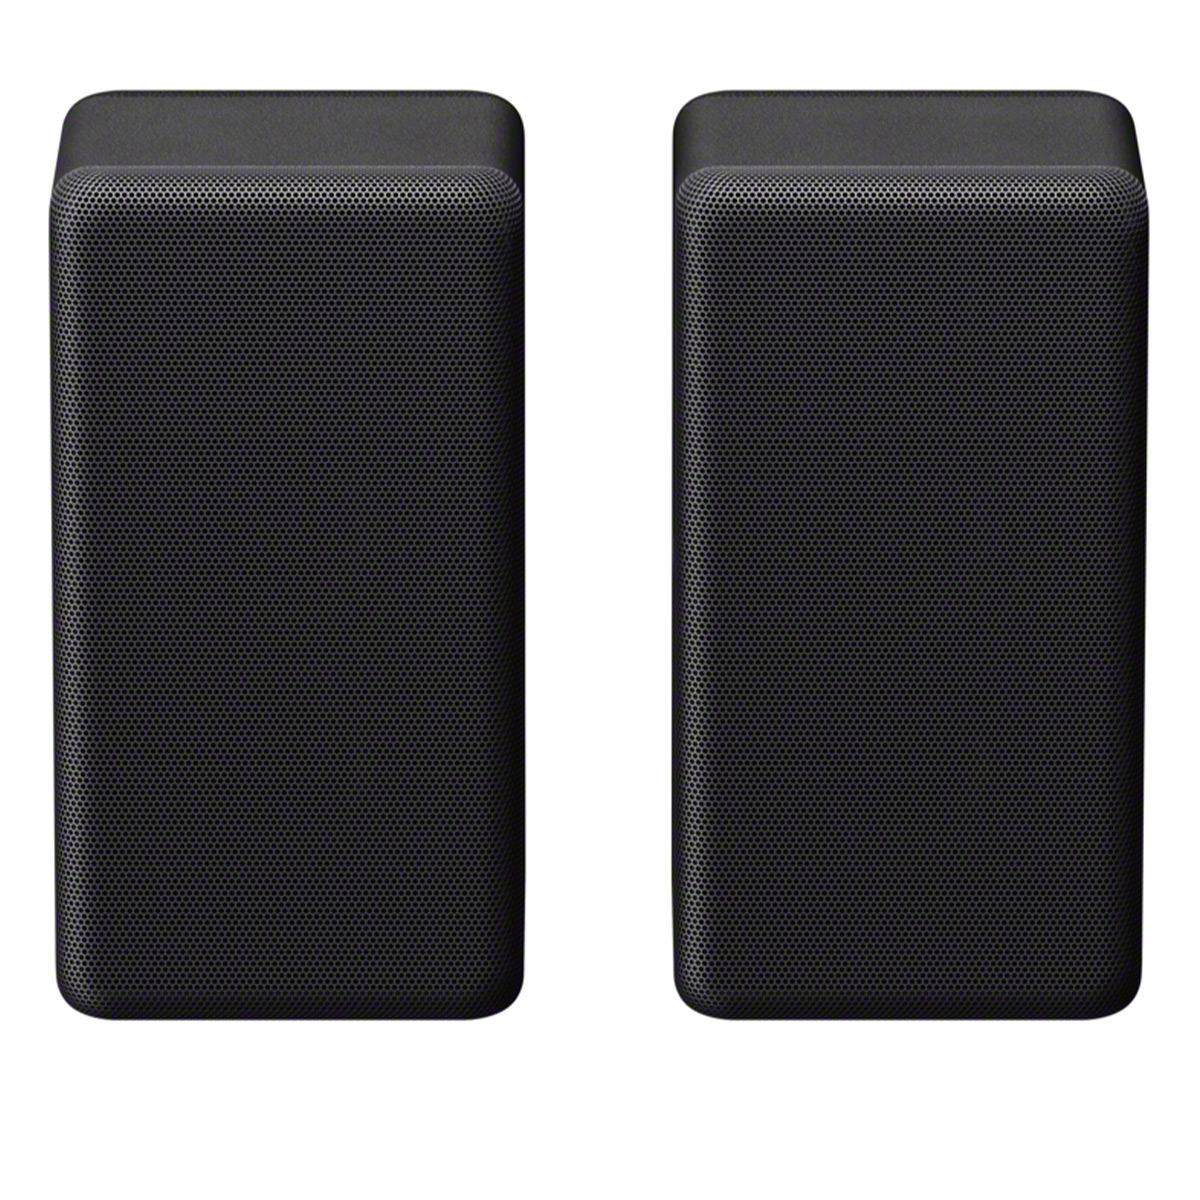 Sony SA-RS3S Wireless Rear Speakers for HT-A7000 (Pair) - image 1 of 4